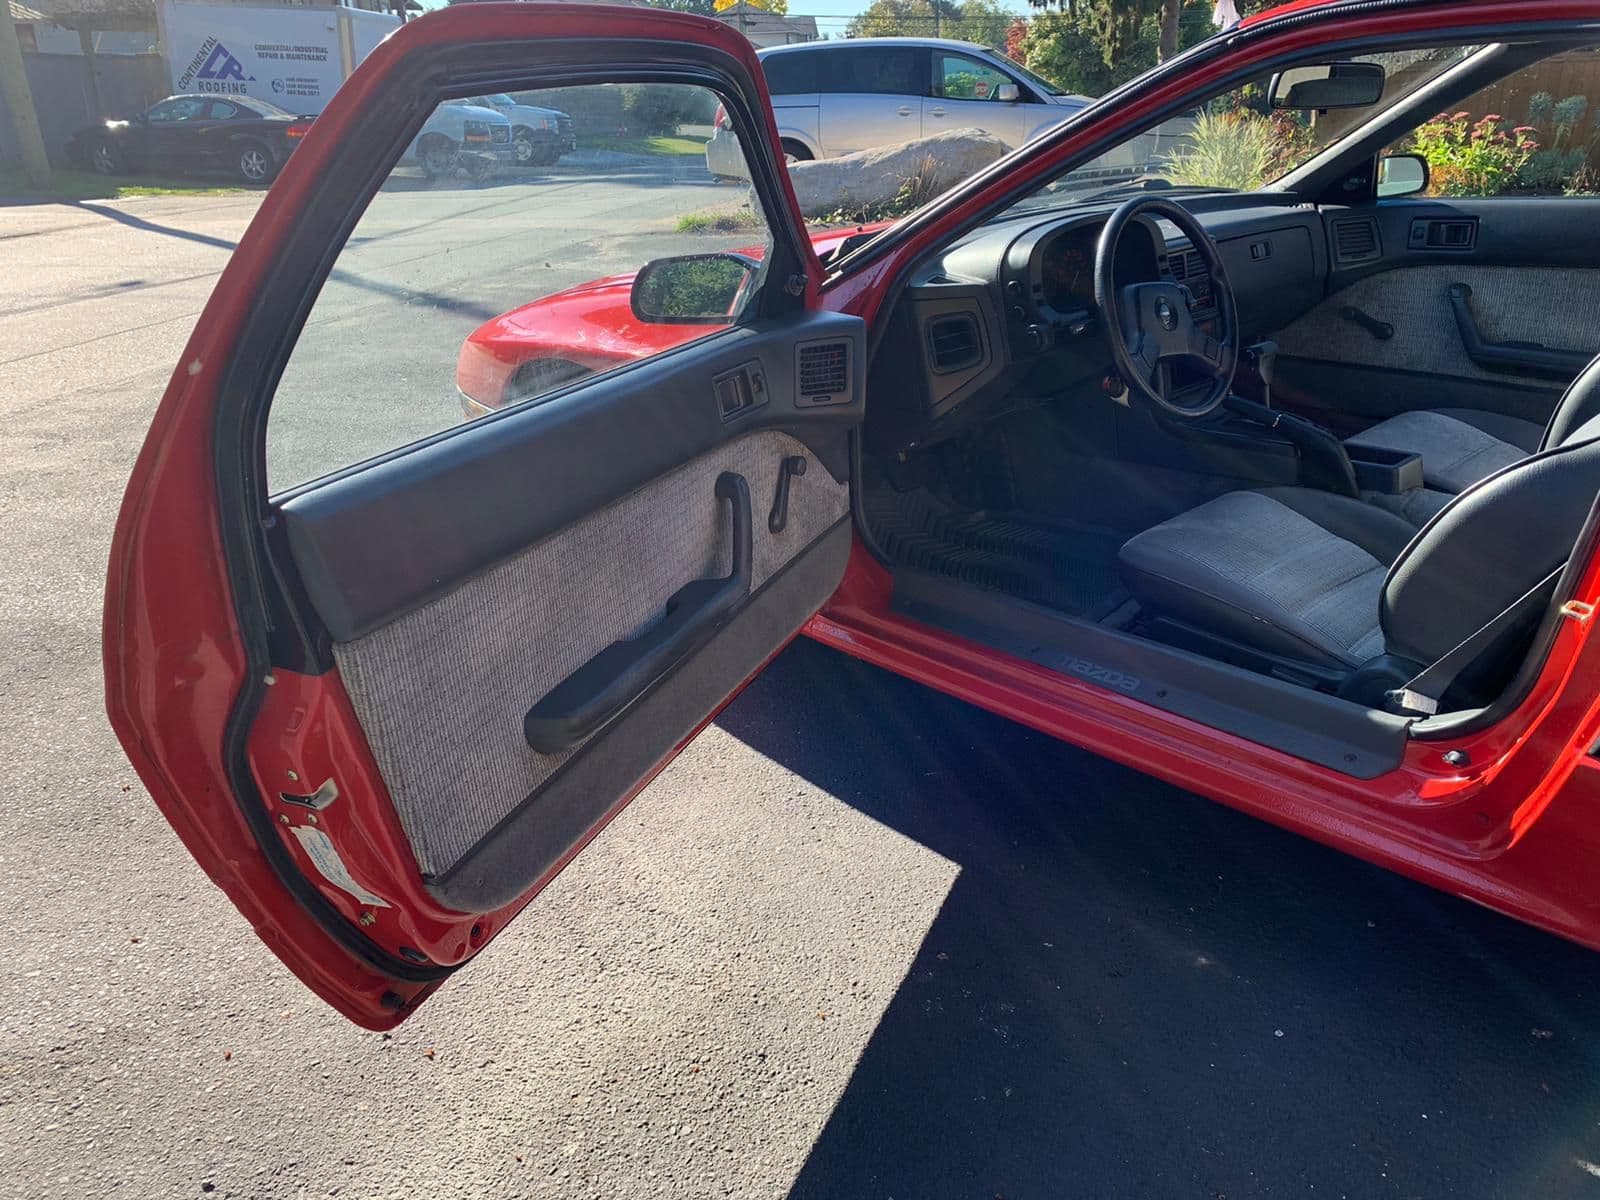 1987 Mazda RX-7 - 1987 RX7 like new only 71000miles - Used - VIN JM1FC3315H0539264 - 71,000 Miles - Other - 2WD - Automatic - Coupe - Red - Surrey, BC V3V2J2, Canada